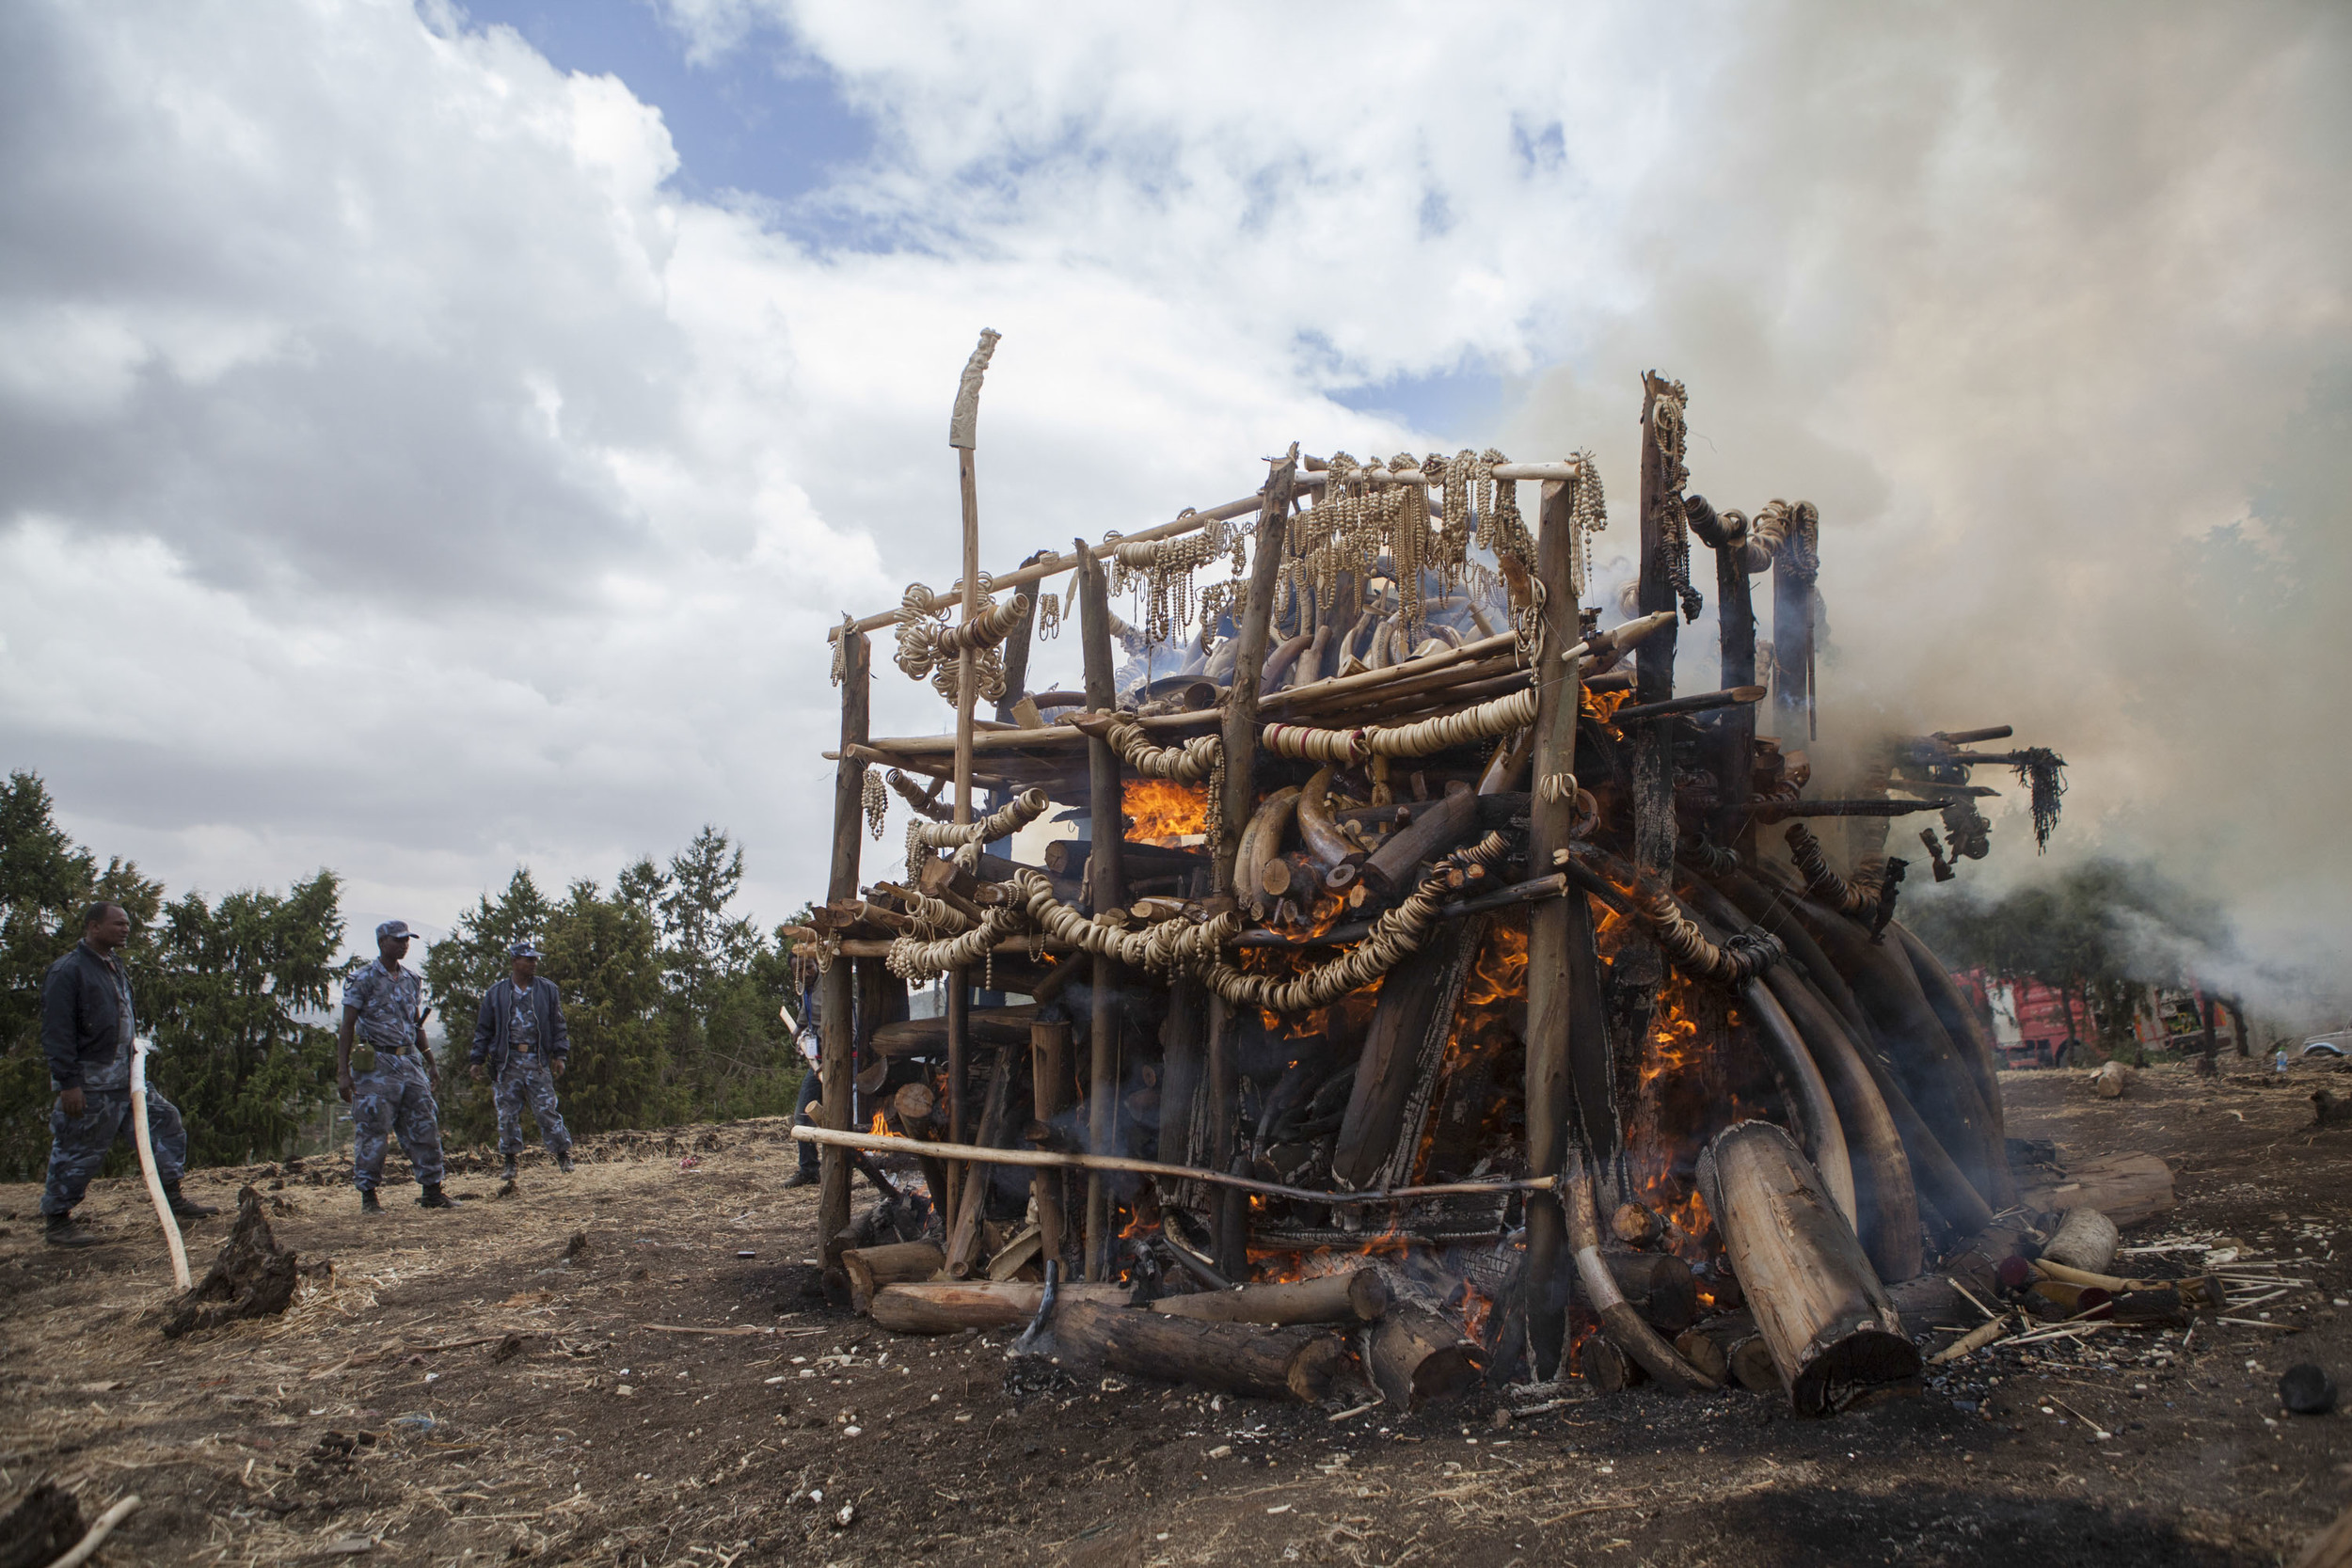  Federal Police of Addis Ababa are pictured looking on to the 6 ton mass of ivory as it burns outside of Addis Ababa on 20 March 2015. The ivory has been collected from seizures at Addis Ababa Airport, as well as from illegal poaching in Ethiopia. &n